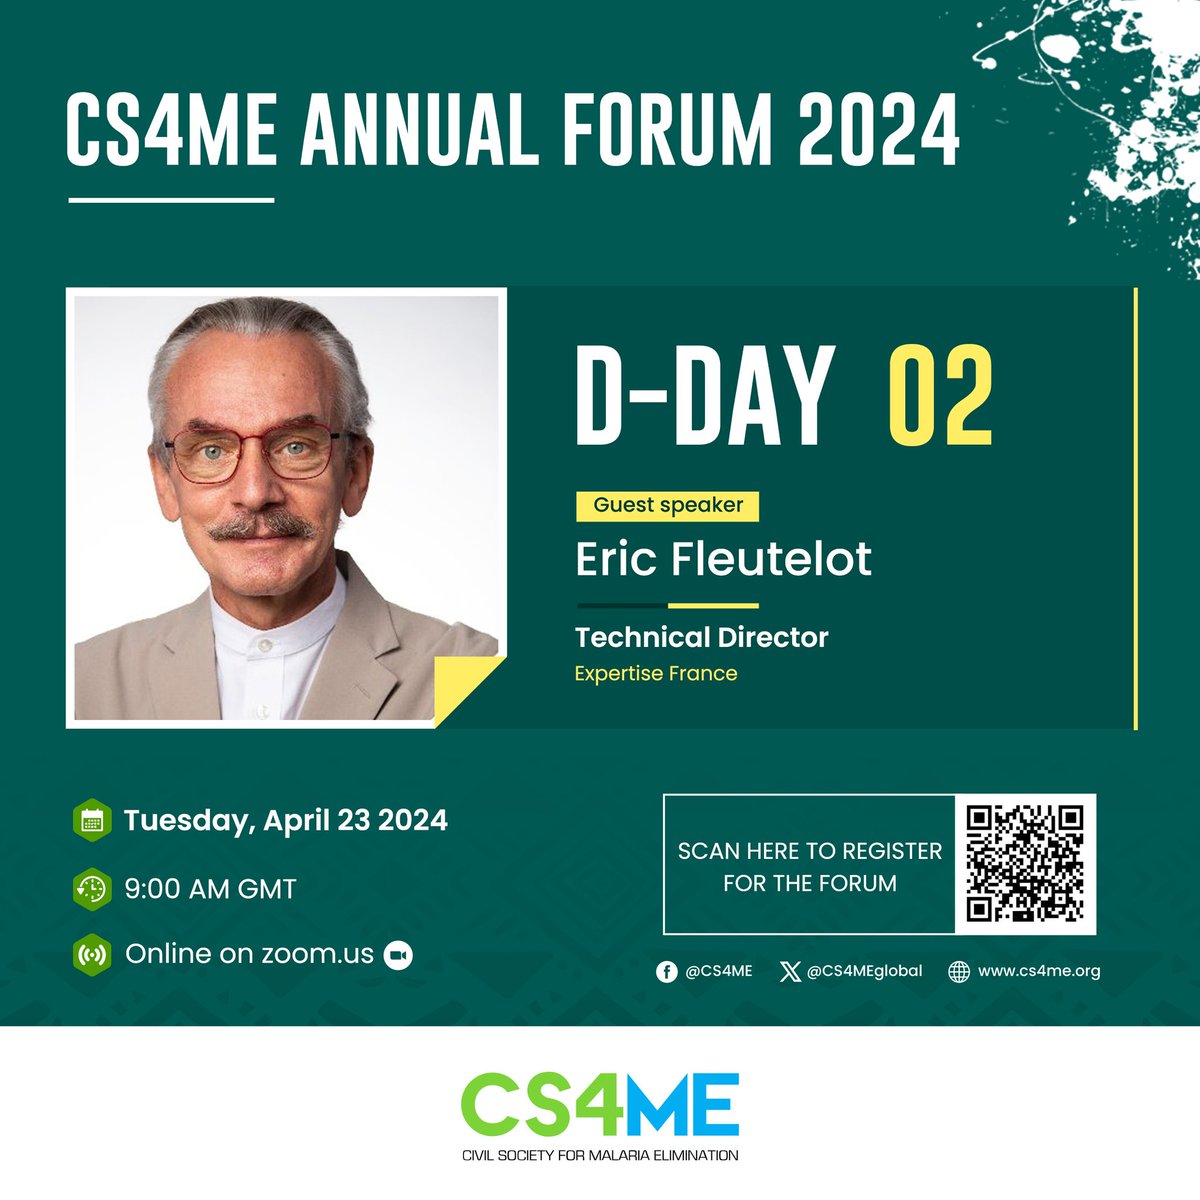 📢 Only 02 days left for the CS4ME 2024 Annual Forum. Have you registered yet for this major conference? It is going to be very insightful and engaging around the latest malaria topics! ✍🏼 Book your seat today here: us02web.zoom.us/webinar/regist… #EndMalaria #WorldMalariaDay